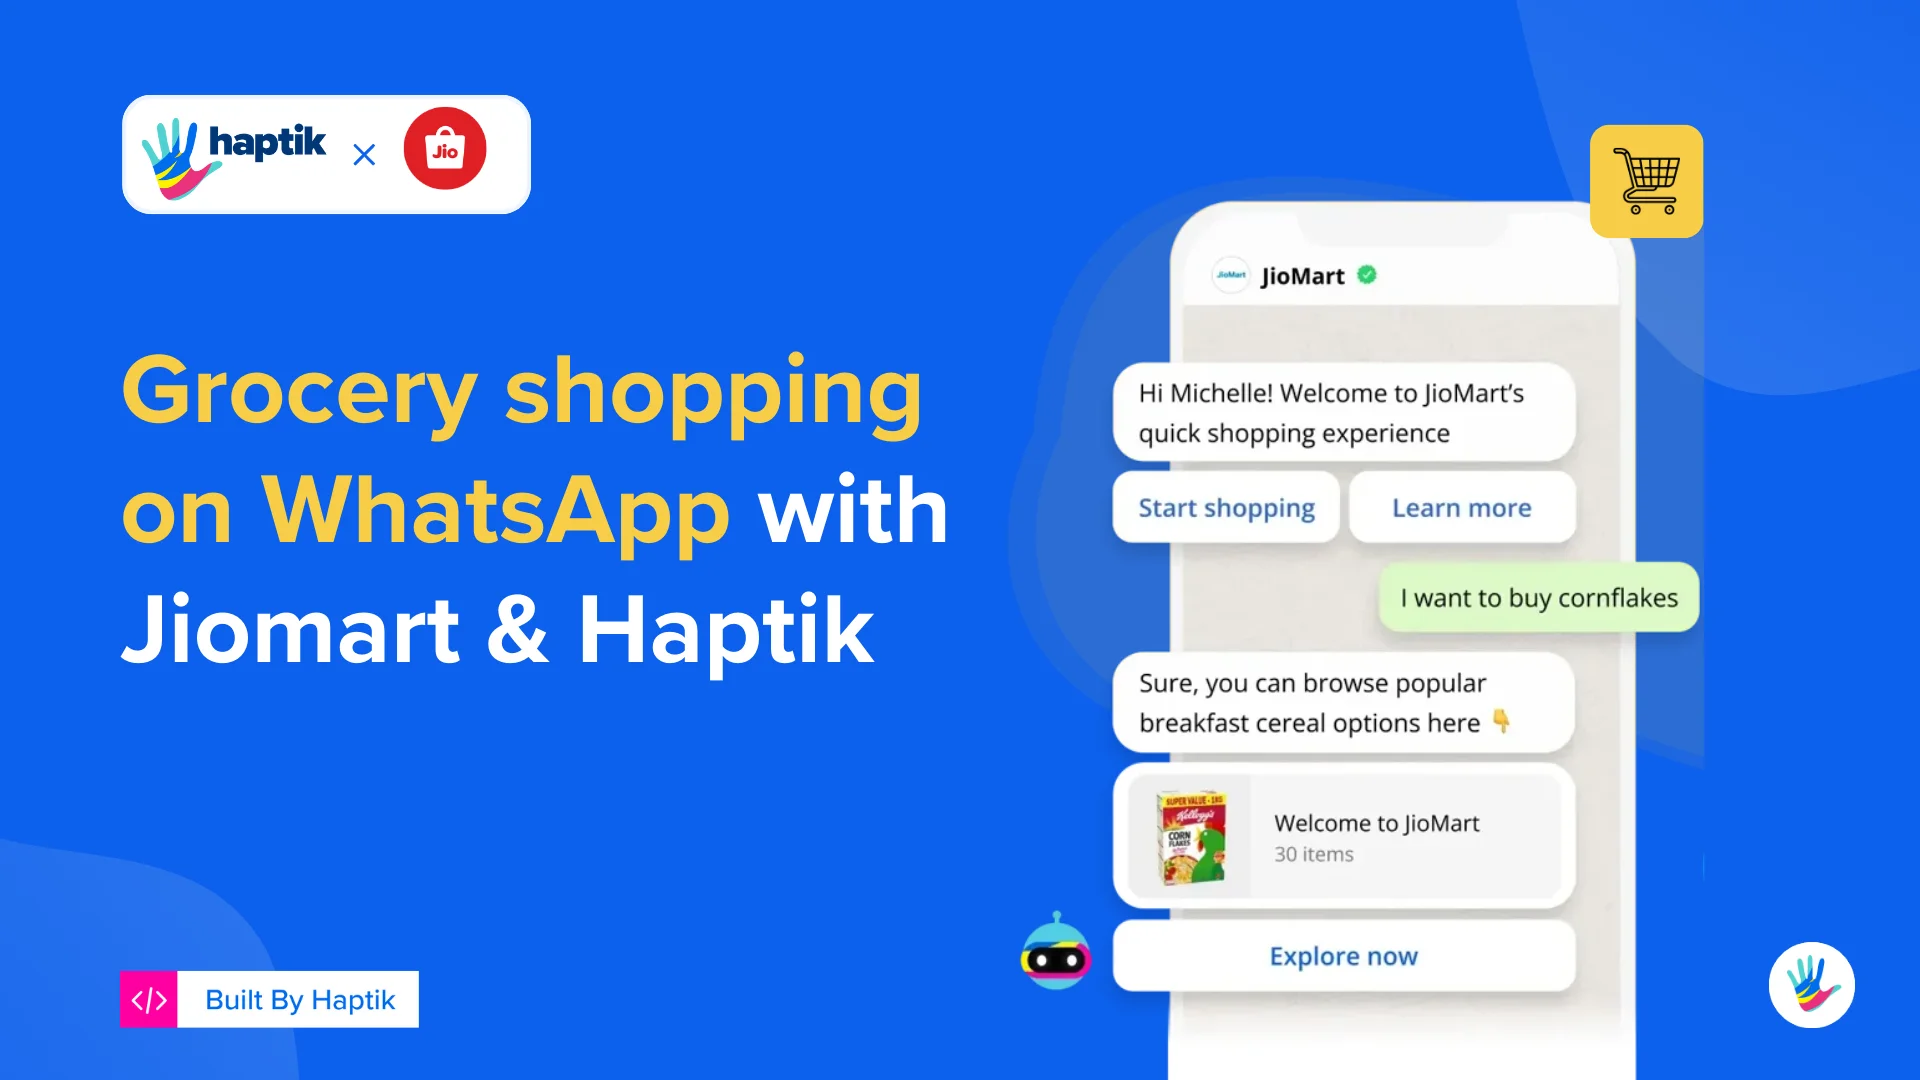 jiomart: Meta and Jio Platforms collaborate to launch JioMart shopping  services on WhatsApp - The Economic Times